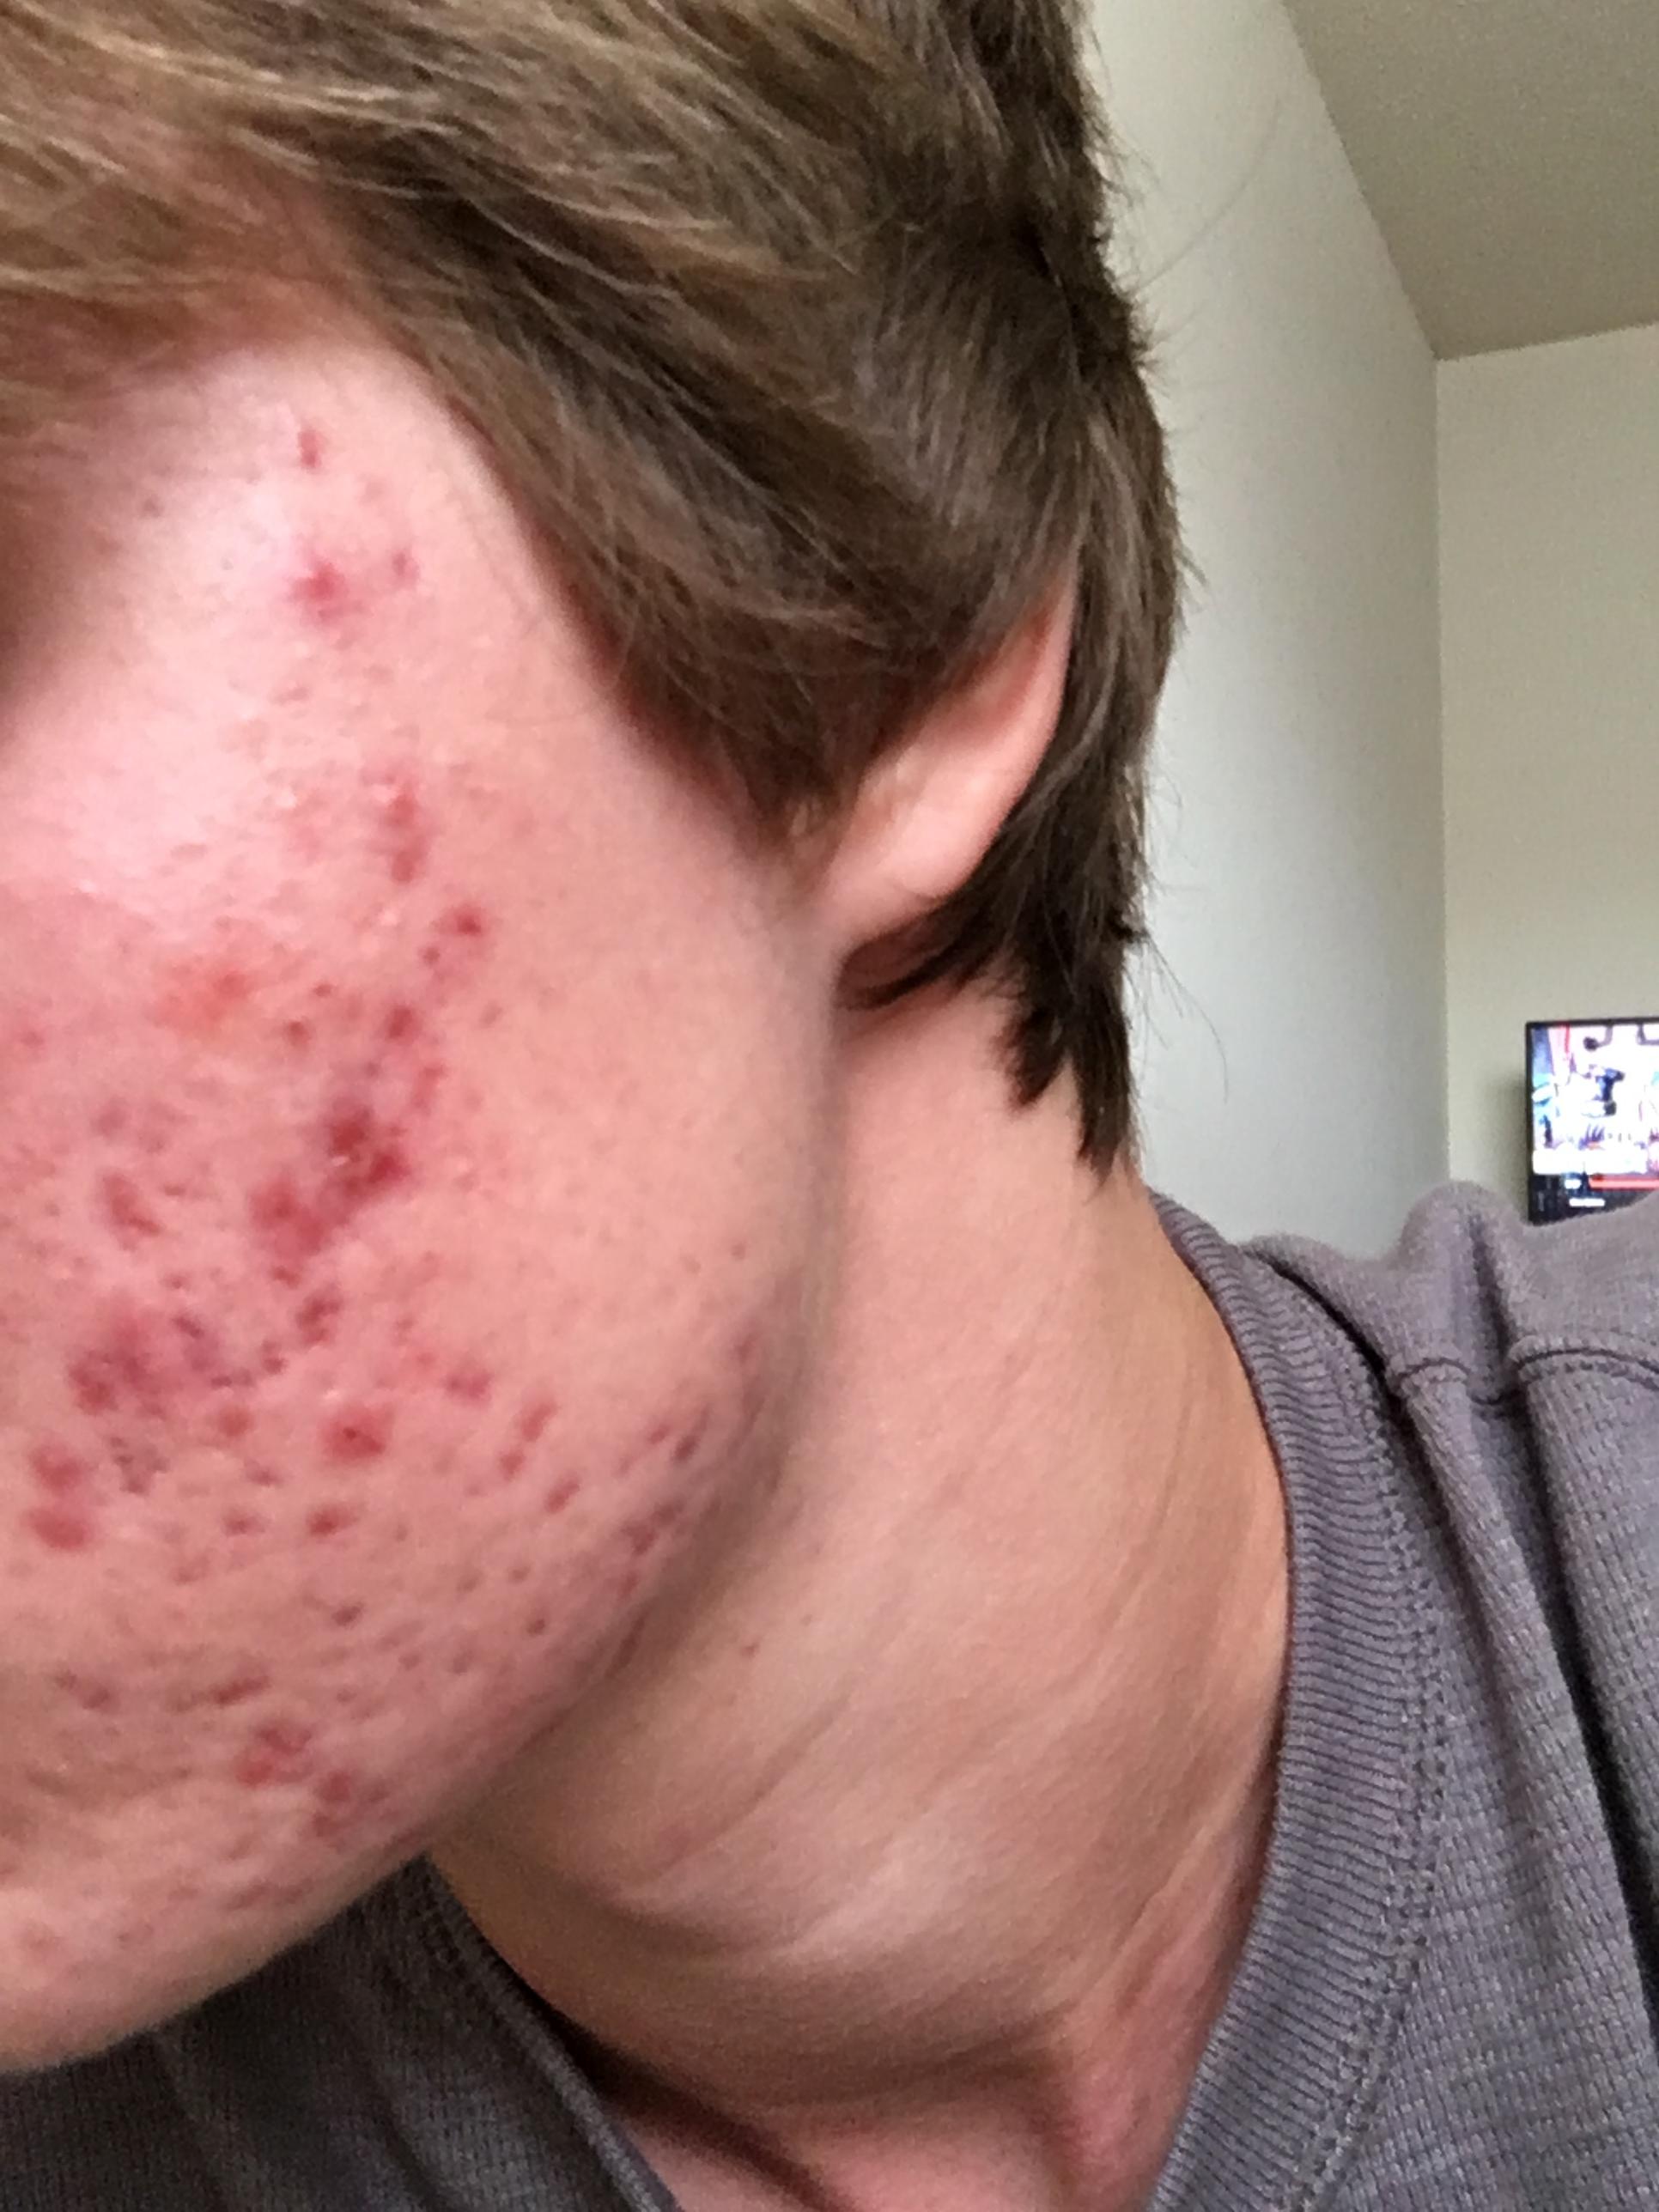 How Severe is my acne, and What can be Done to Help it? - General acne